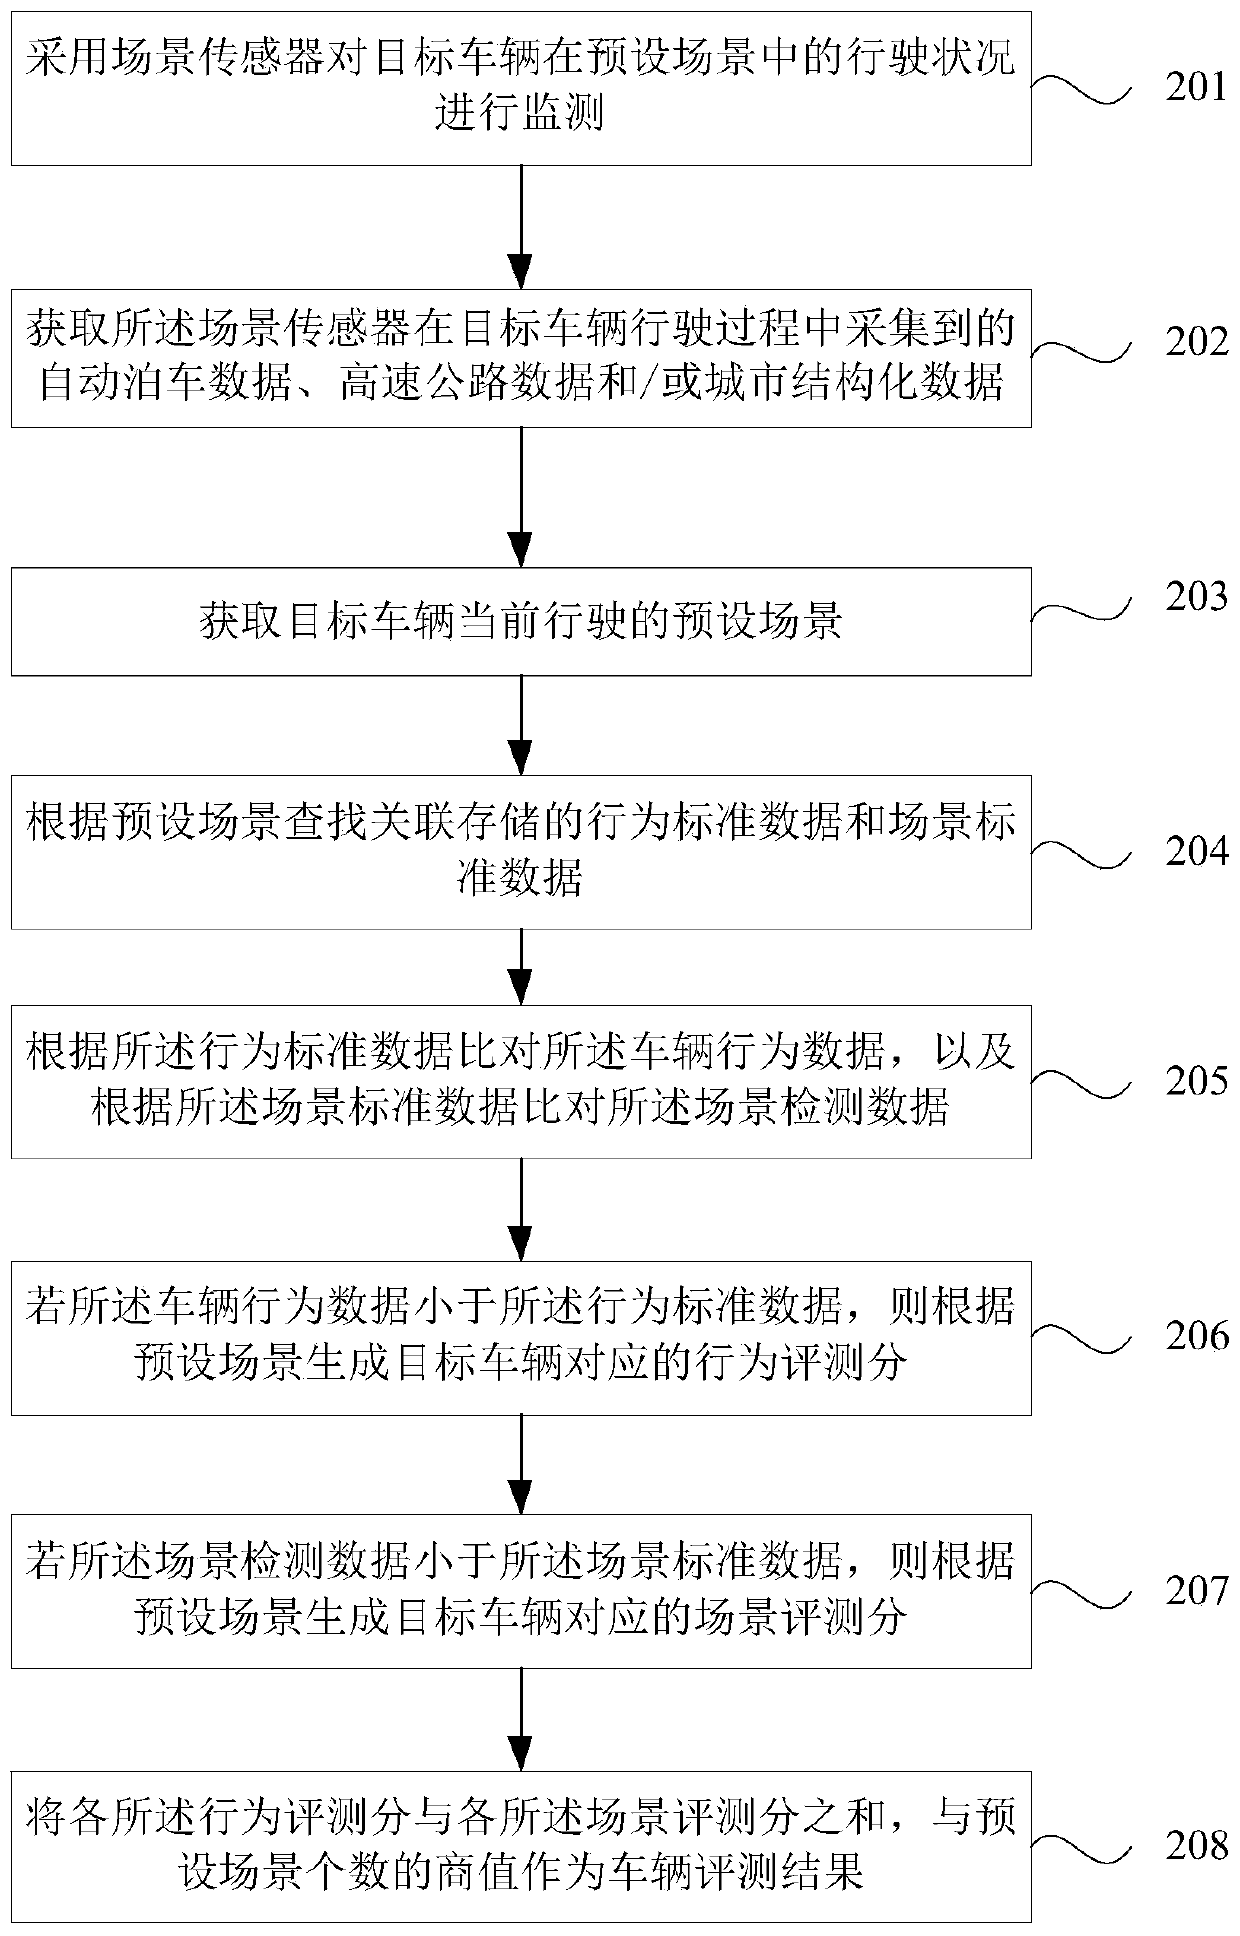 Vehicle performance detecting and evaluating method and device, equipment and storage medium